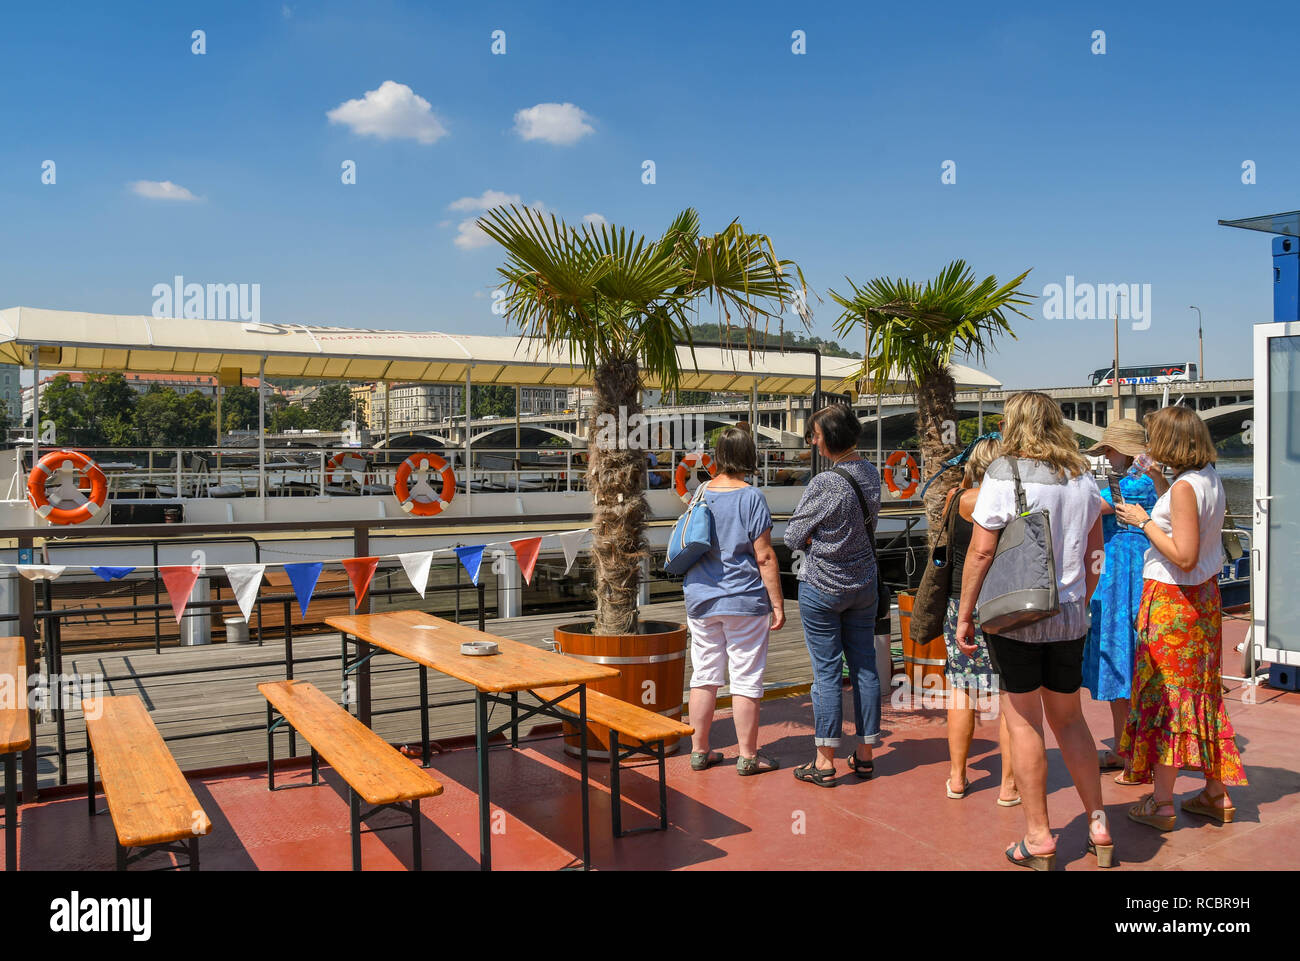 PRAGUE, CZECH REPUBLIC - JULY 2018: Group of people waiting to board a sightseeing river cruise boat on the River Vltava in Prague. Stock Photo